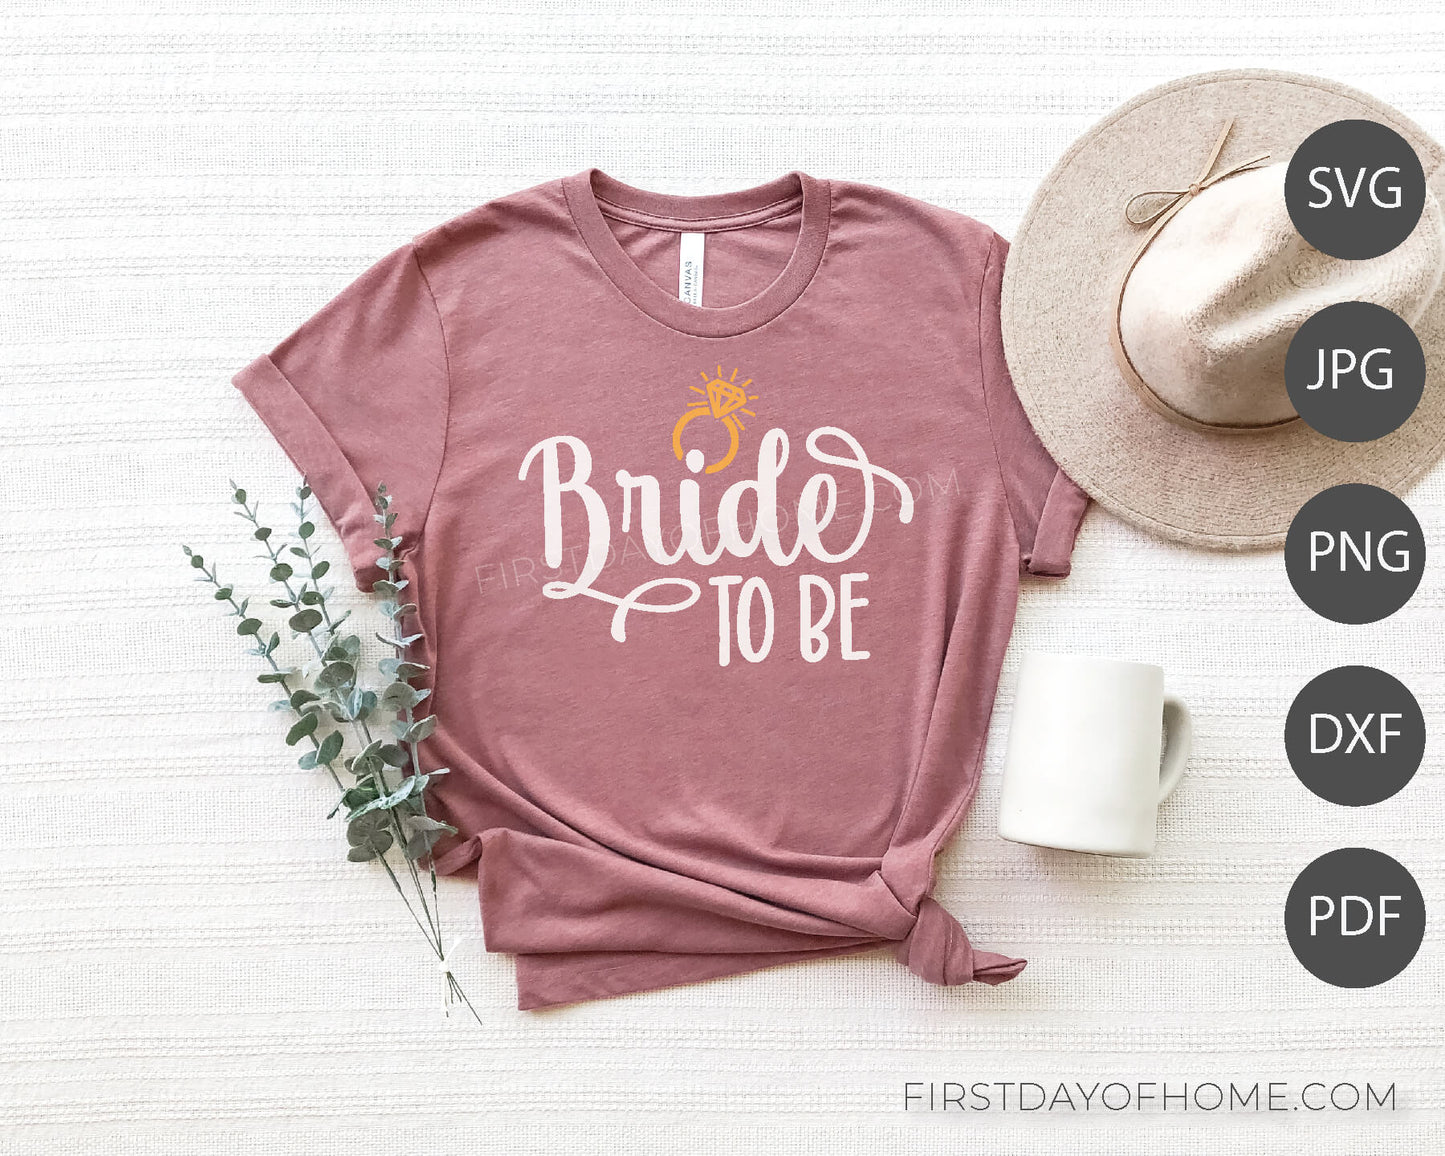 Bride to Be digital design with diamond wedding ring  shown as a mockup on a t-shirt with hat, mug, and eucalyptus leaves